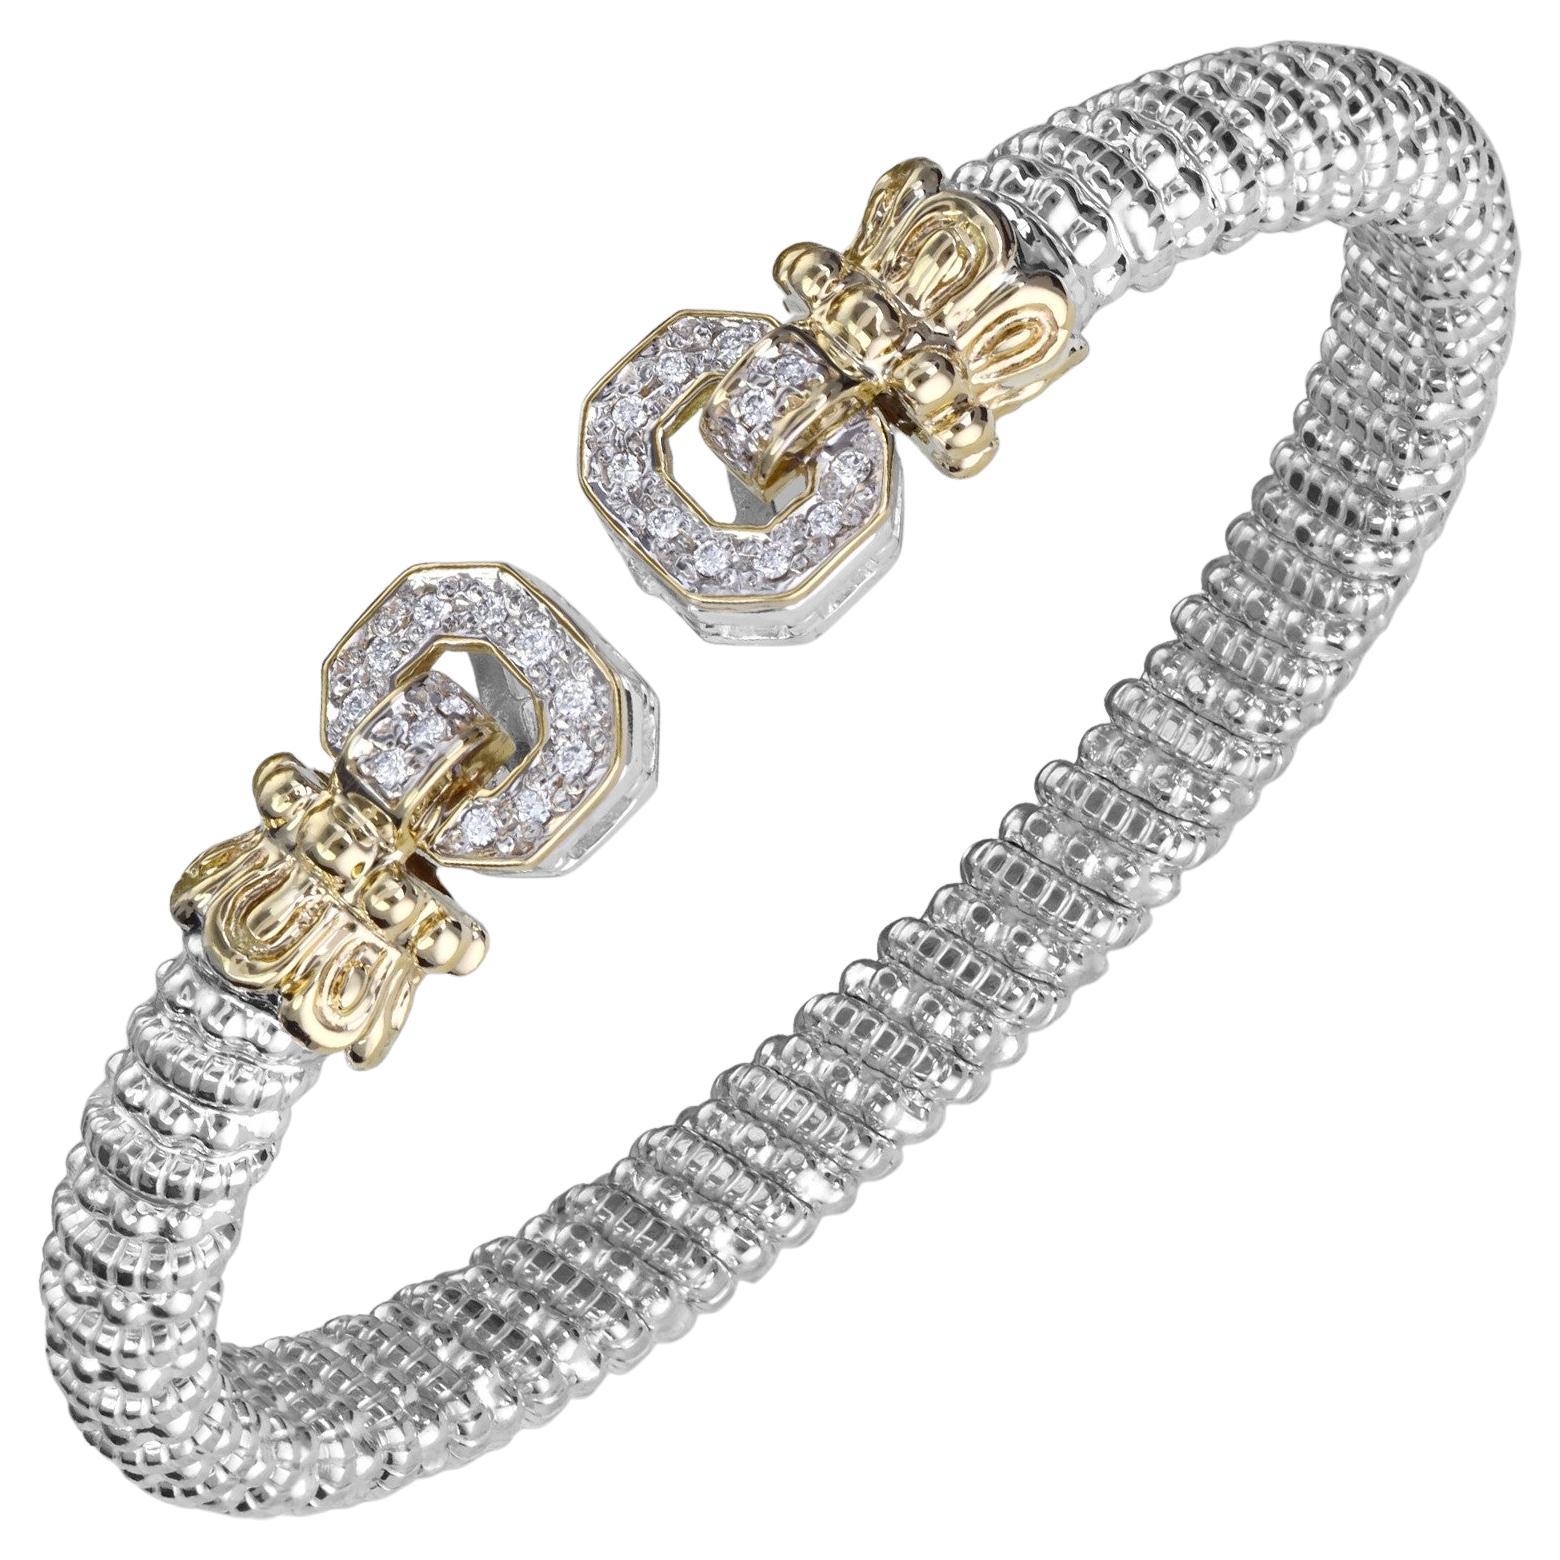 Vahan Open Bangle Bracelet with Diamonds in 14K Yellow Gold and Silver For Sale